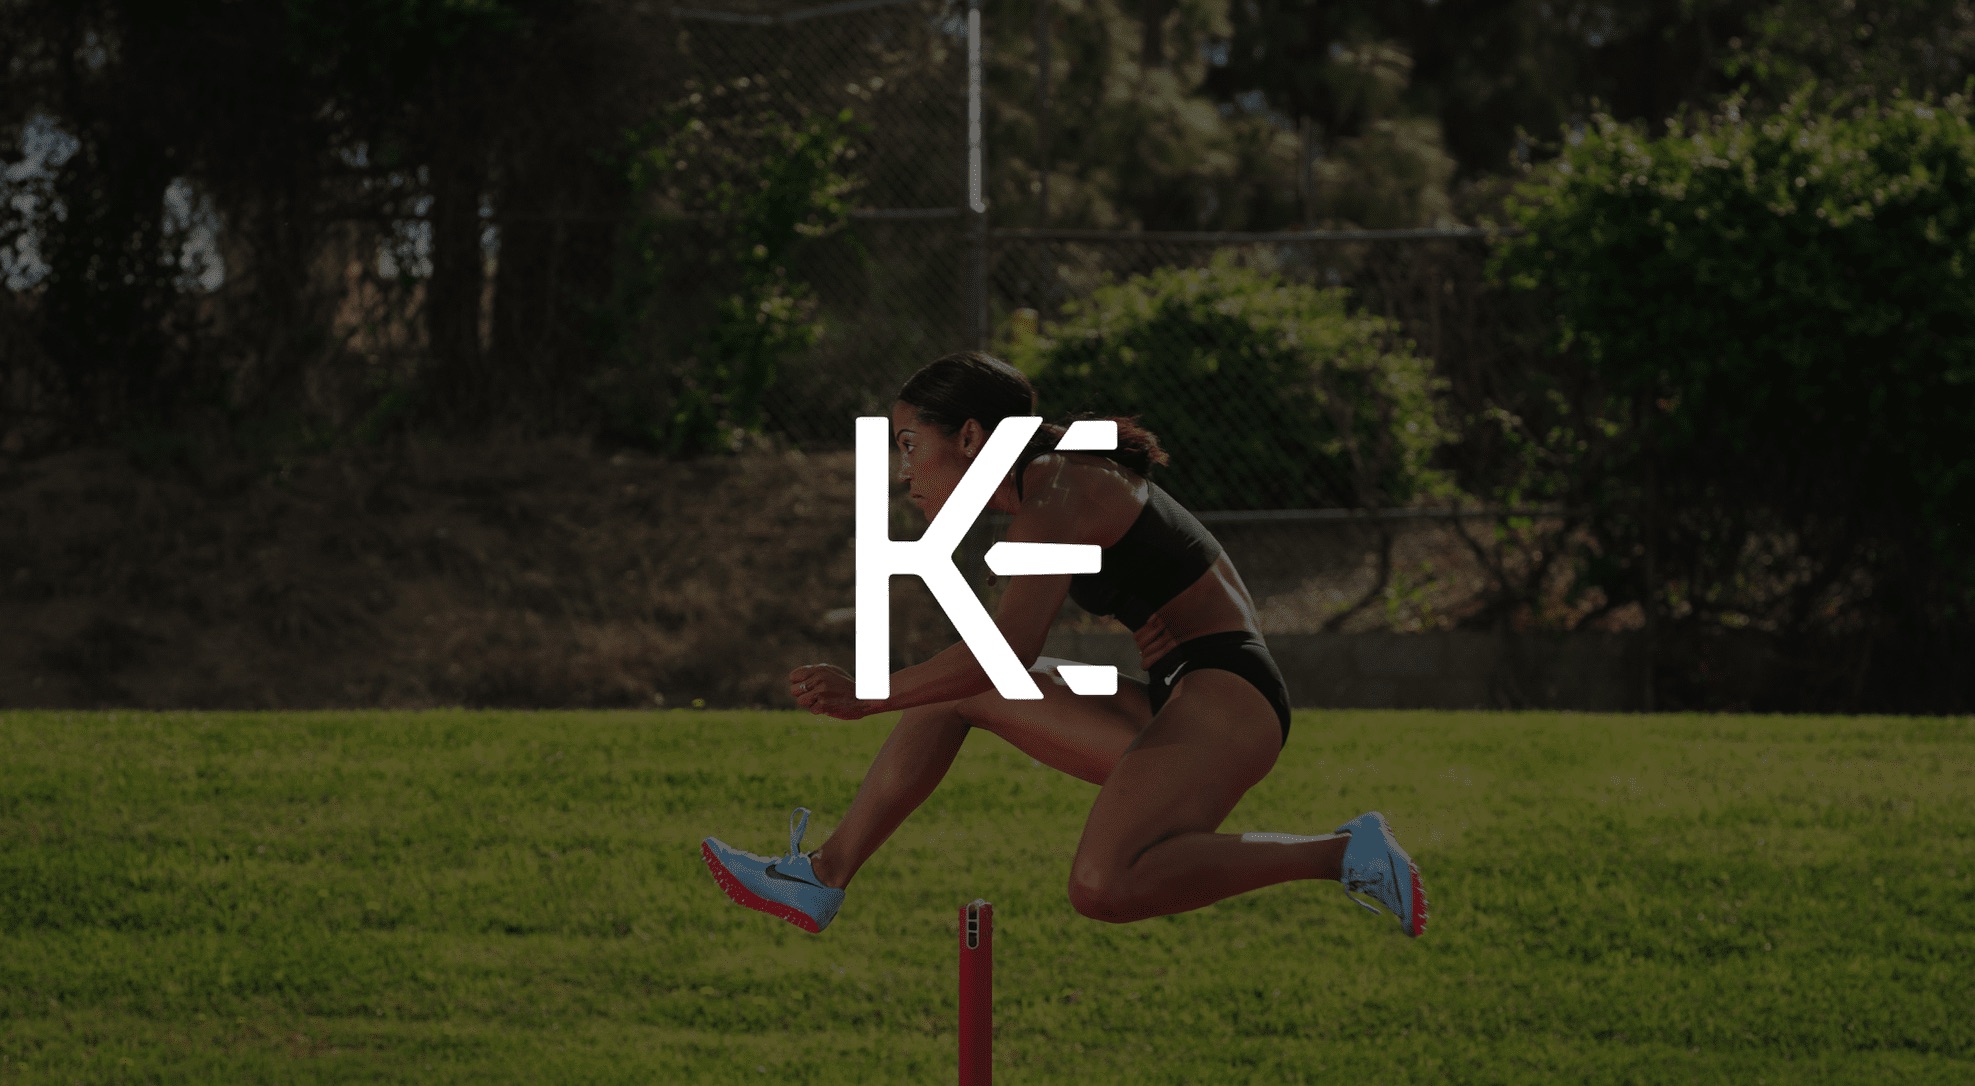 White KE logo against a dimmed background side view of a female track athlete jumping a hurdle